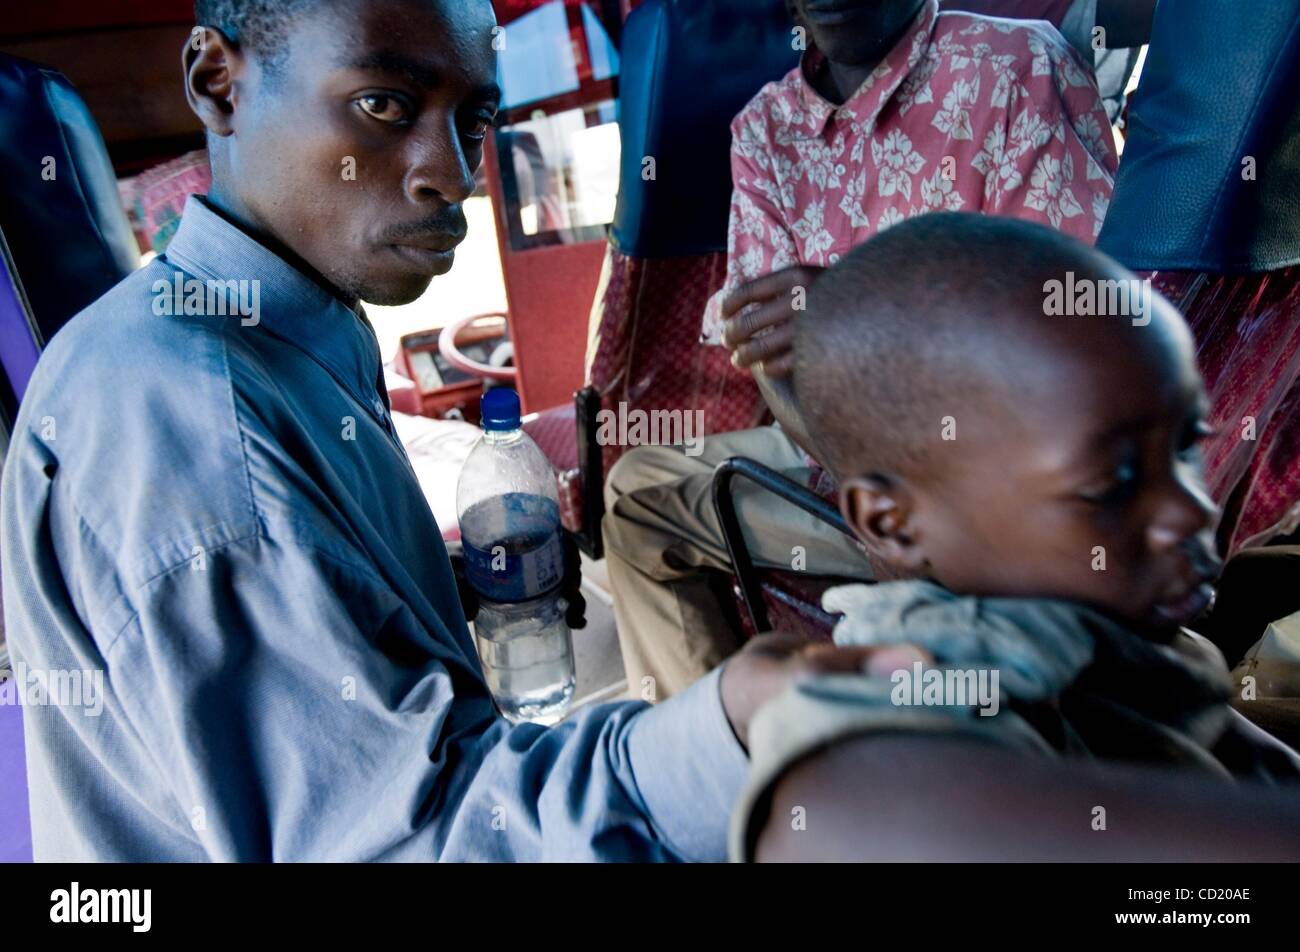 Nov 08, 2008 - Ishasha, Uganda - A father helps his son climb in to a charter bus that will move Congolese refugees to a UNHCR refugee camp in Nakivale. UNHCR moved 258 refugees to the Nakivale camp, about 300 kilometers (186 miles) from the Congo border, adding to the roughly 1,500 refugees who hav Stock Photo